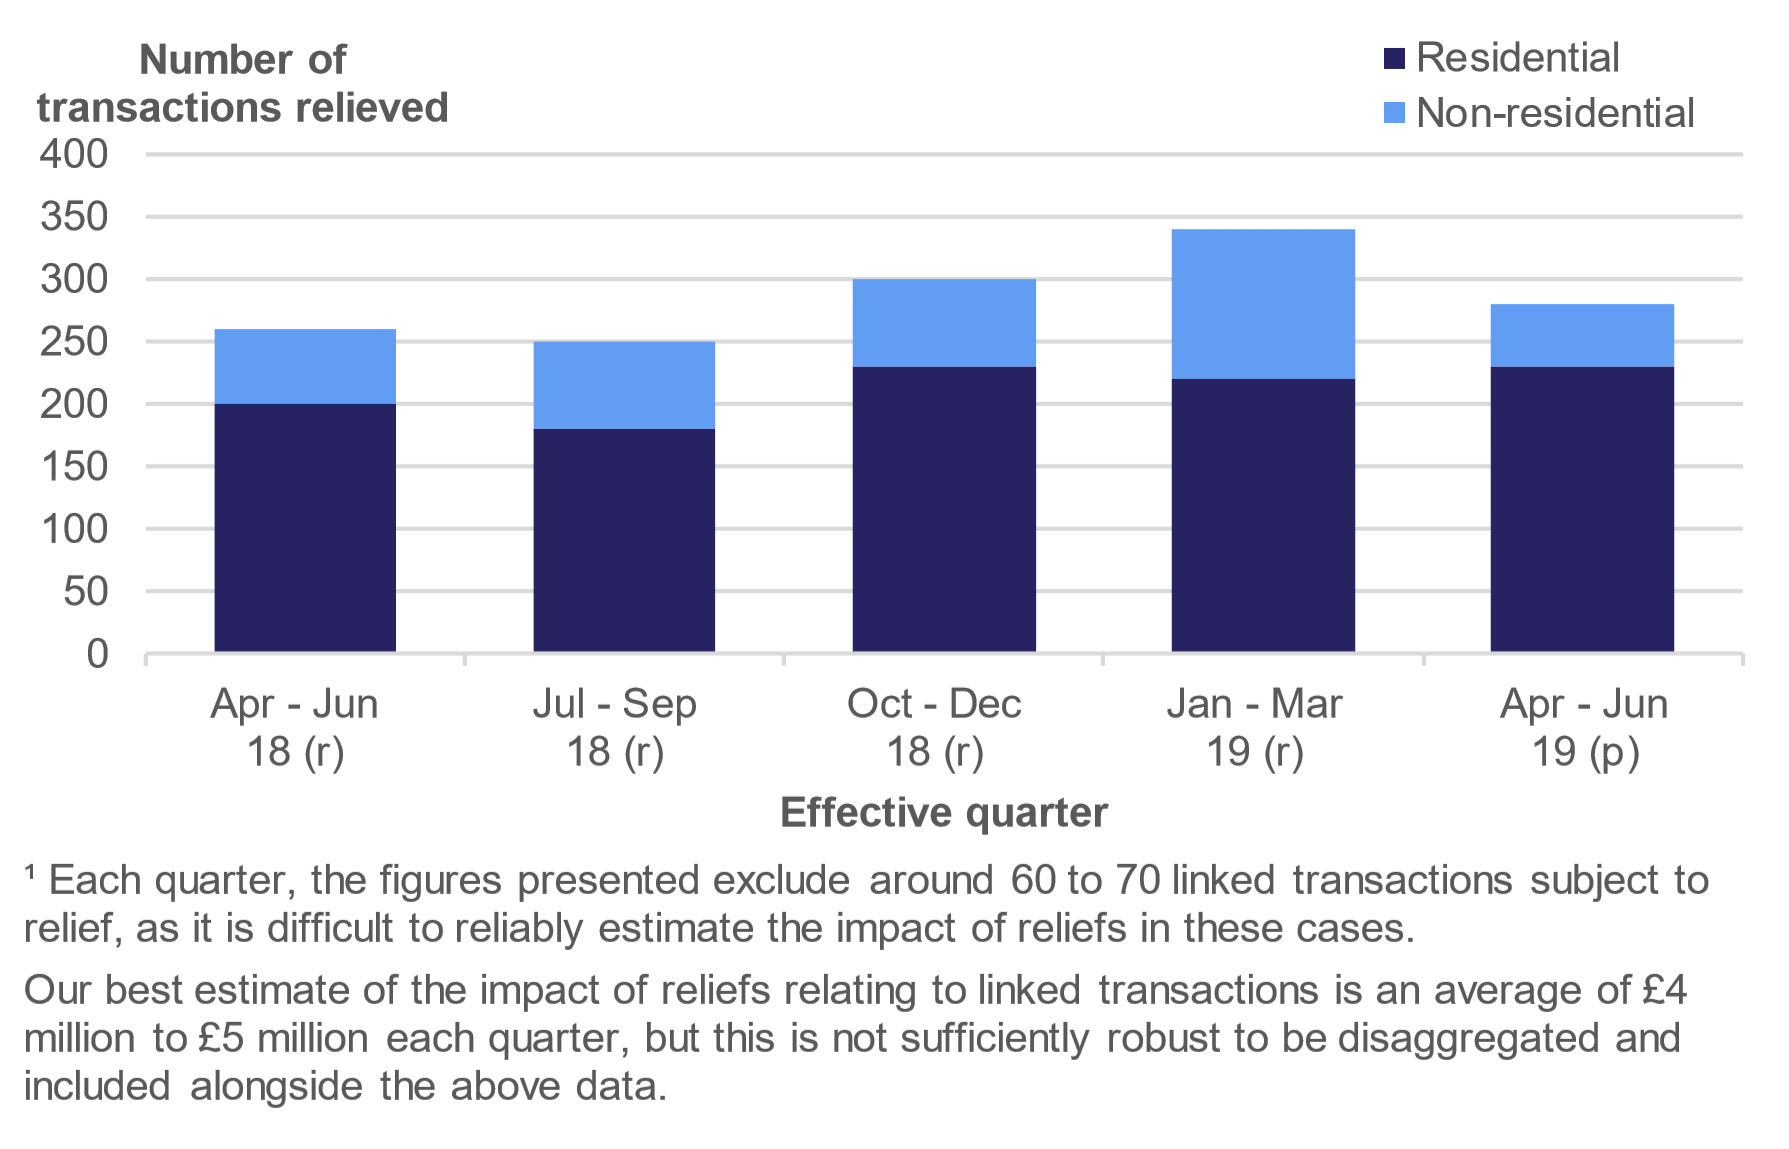 Figure 5.1 shows the number of reliefs applied to residential and non-residential transactions, by type of relief and quarter the transaction was relieved.